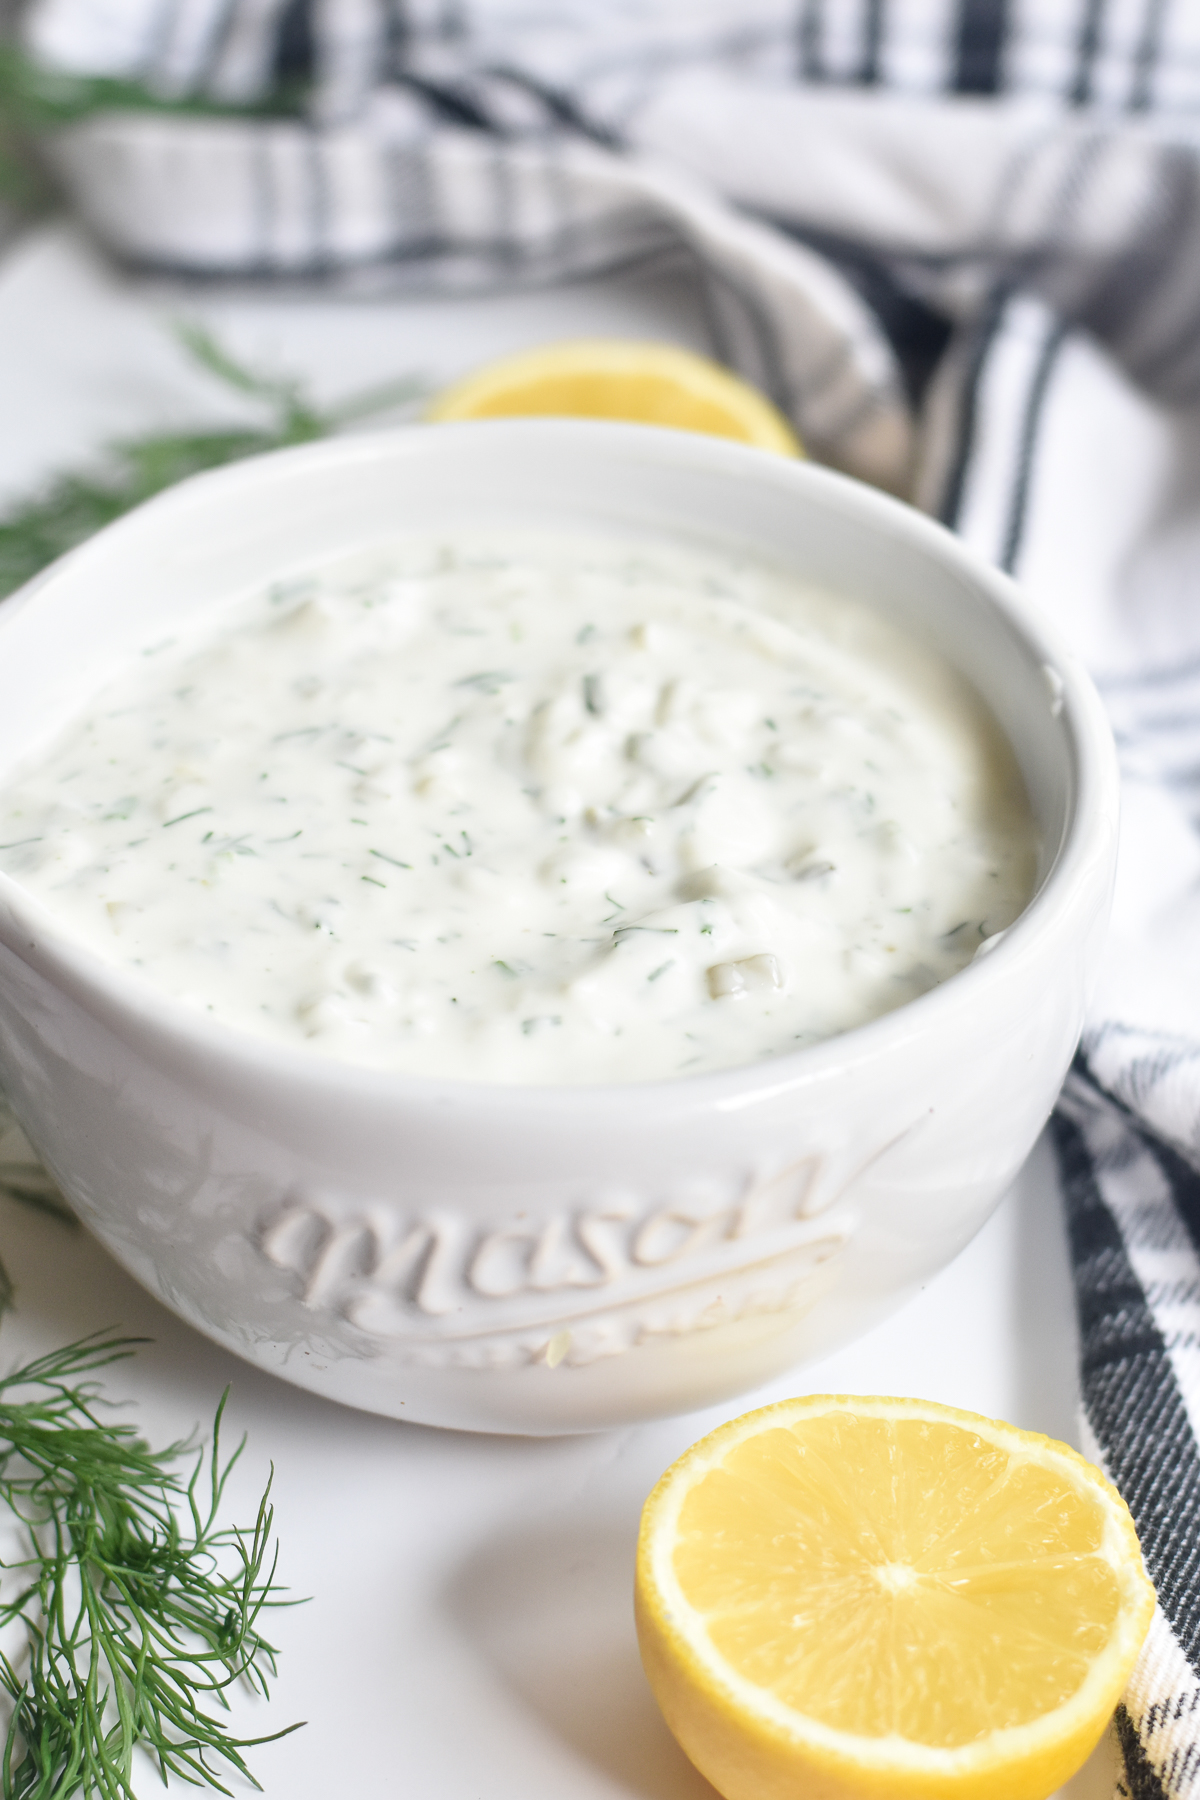 Easy homemade Vegan Tartar Sauce is the bet tartar sauce out there! It's creamy, bright and fresh. Perfect for serving with your favorite vegan fish recipes.